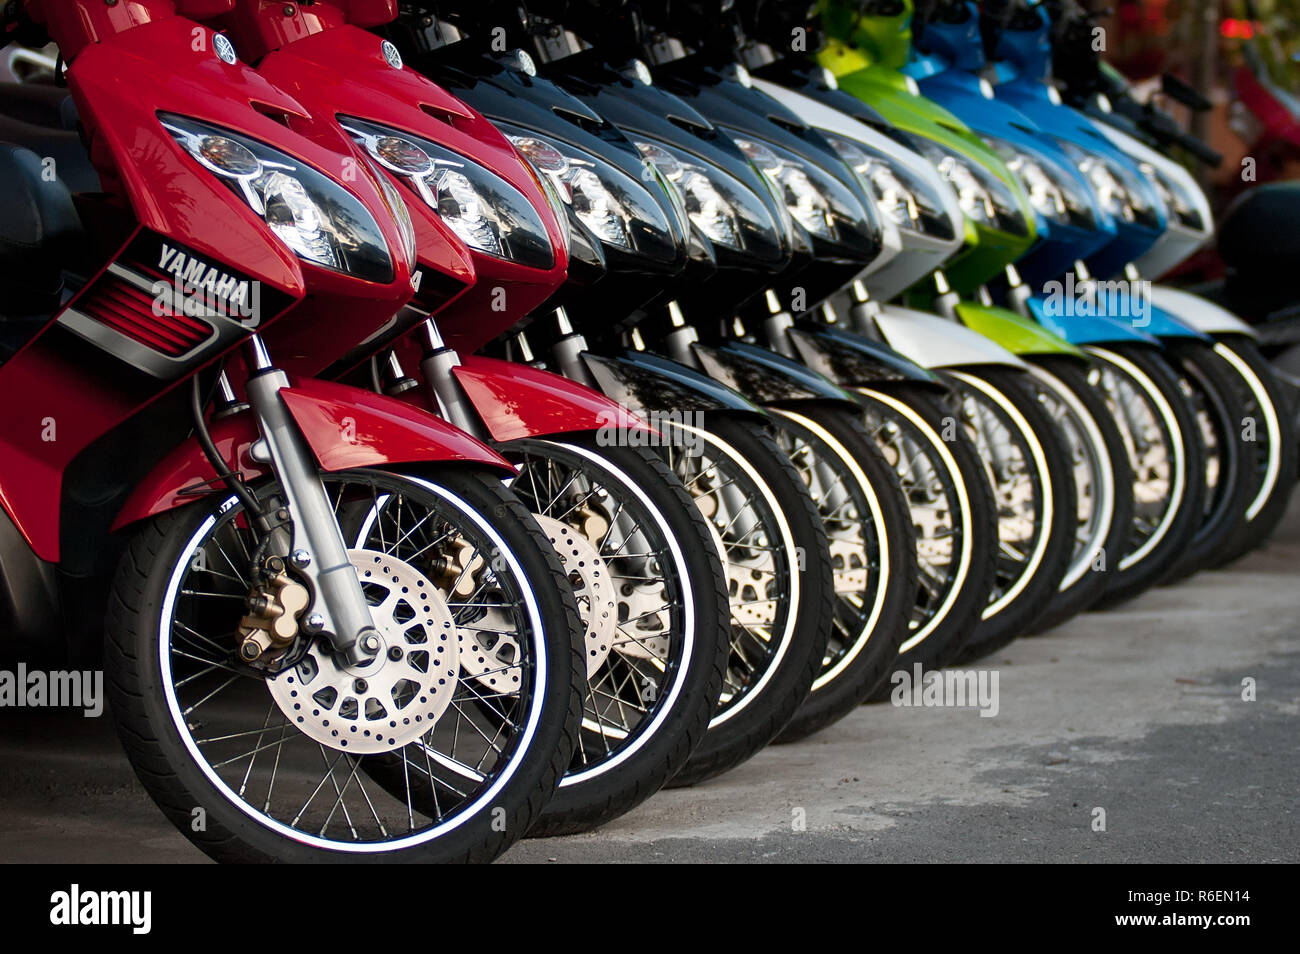 Row Of Motorbikes Available For Rent To Tourists, Bangkok, Thailand Stock Photo